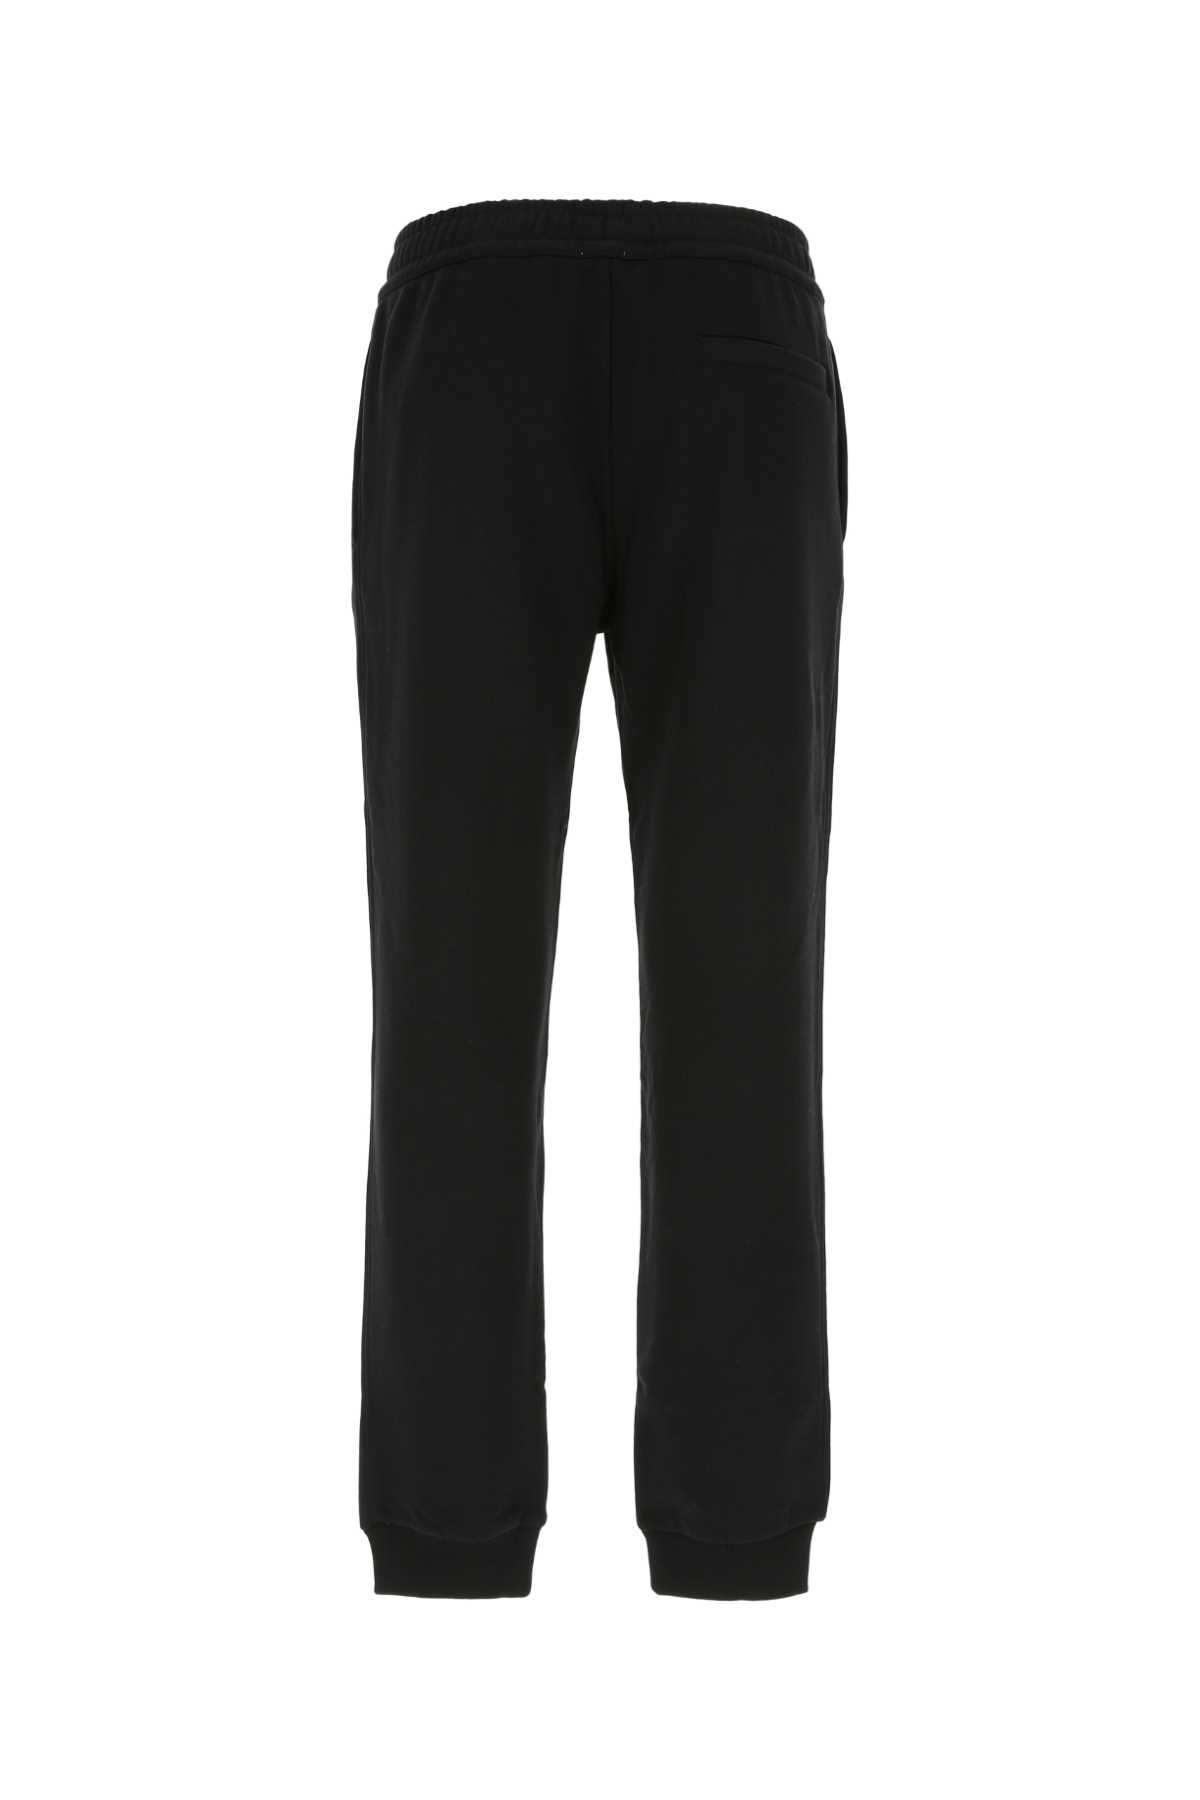 Shop Burberry Black Cotton Joggers In A1189